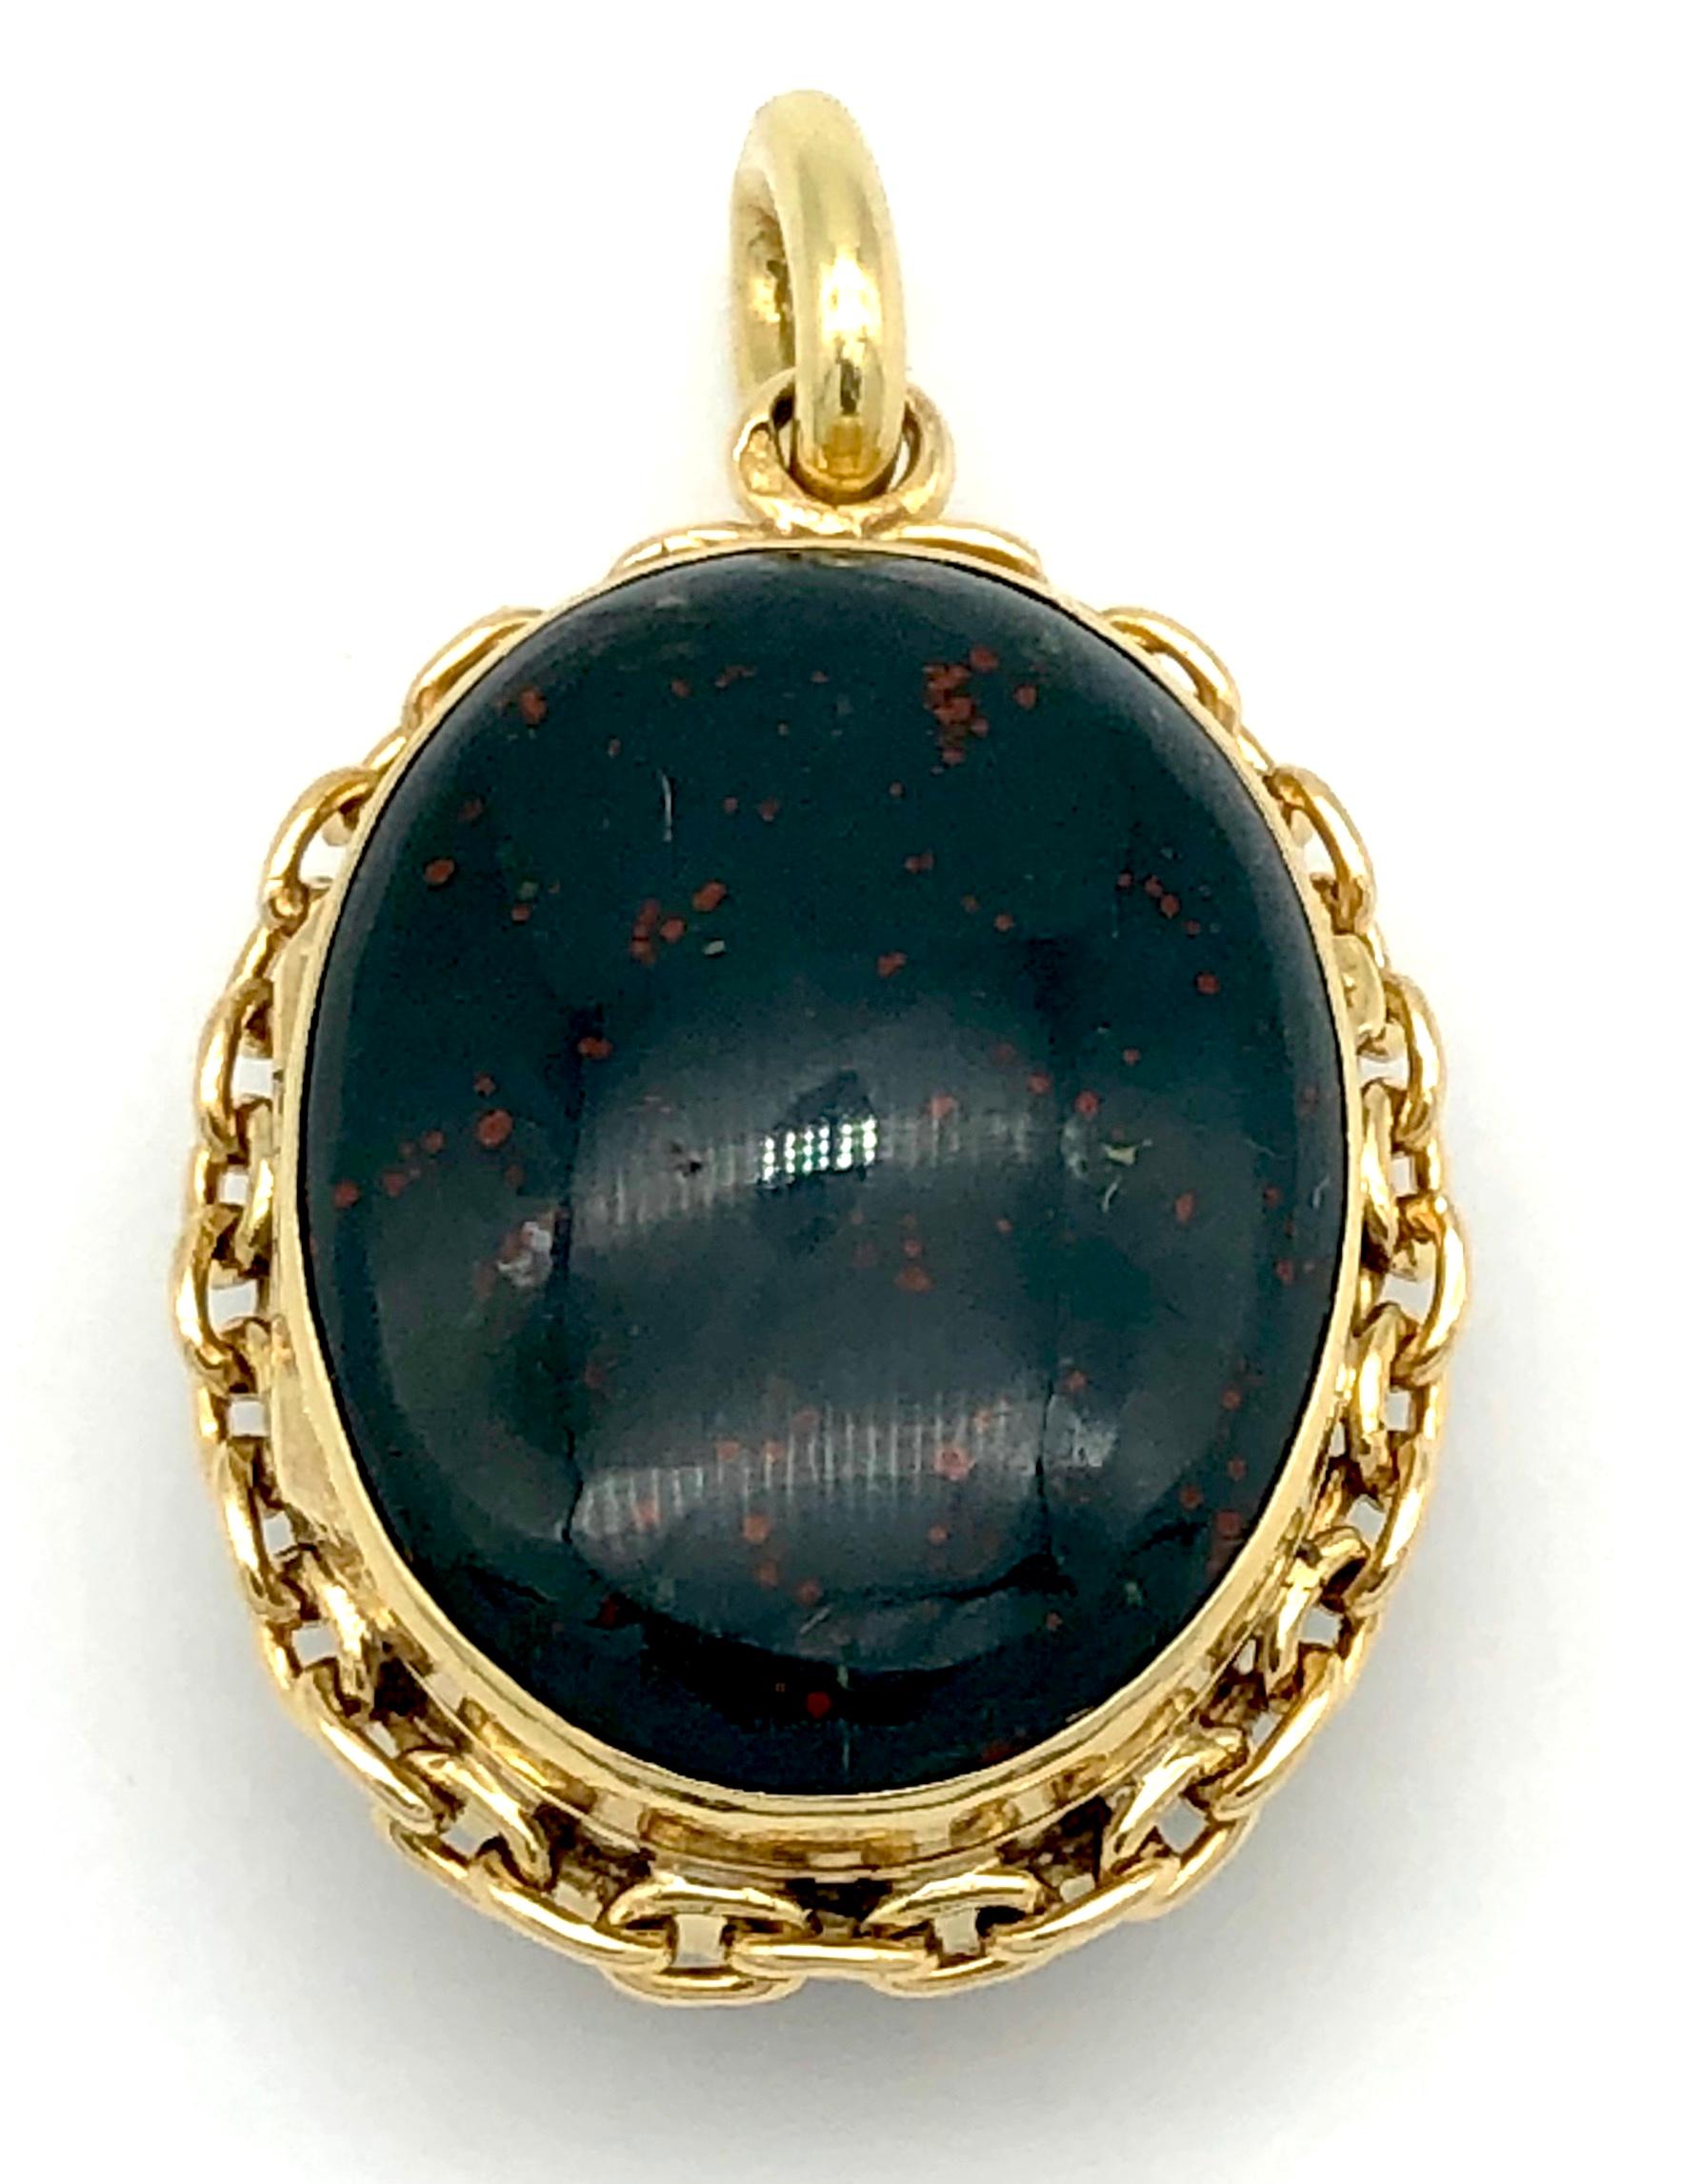 This charming 18kt gold locket has two oval bloodstone cabochons on either side of the pendant. The edge is decorated with chain links. 
On the inside of the locket is a hinged gold frame with glas. 
This small but chunky piece of jewellery is also